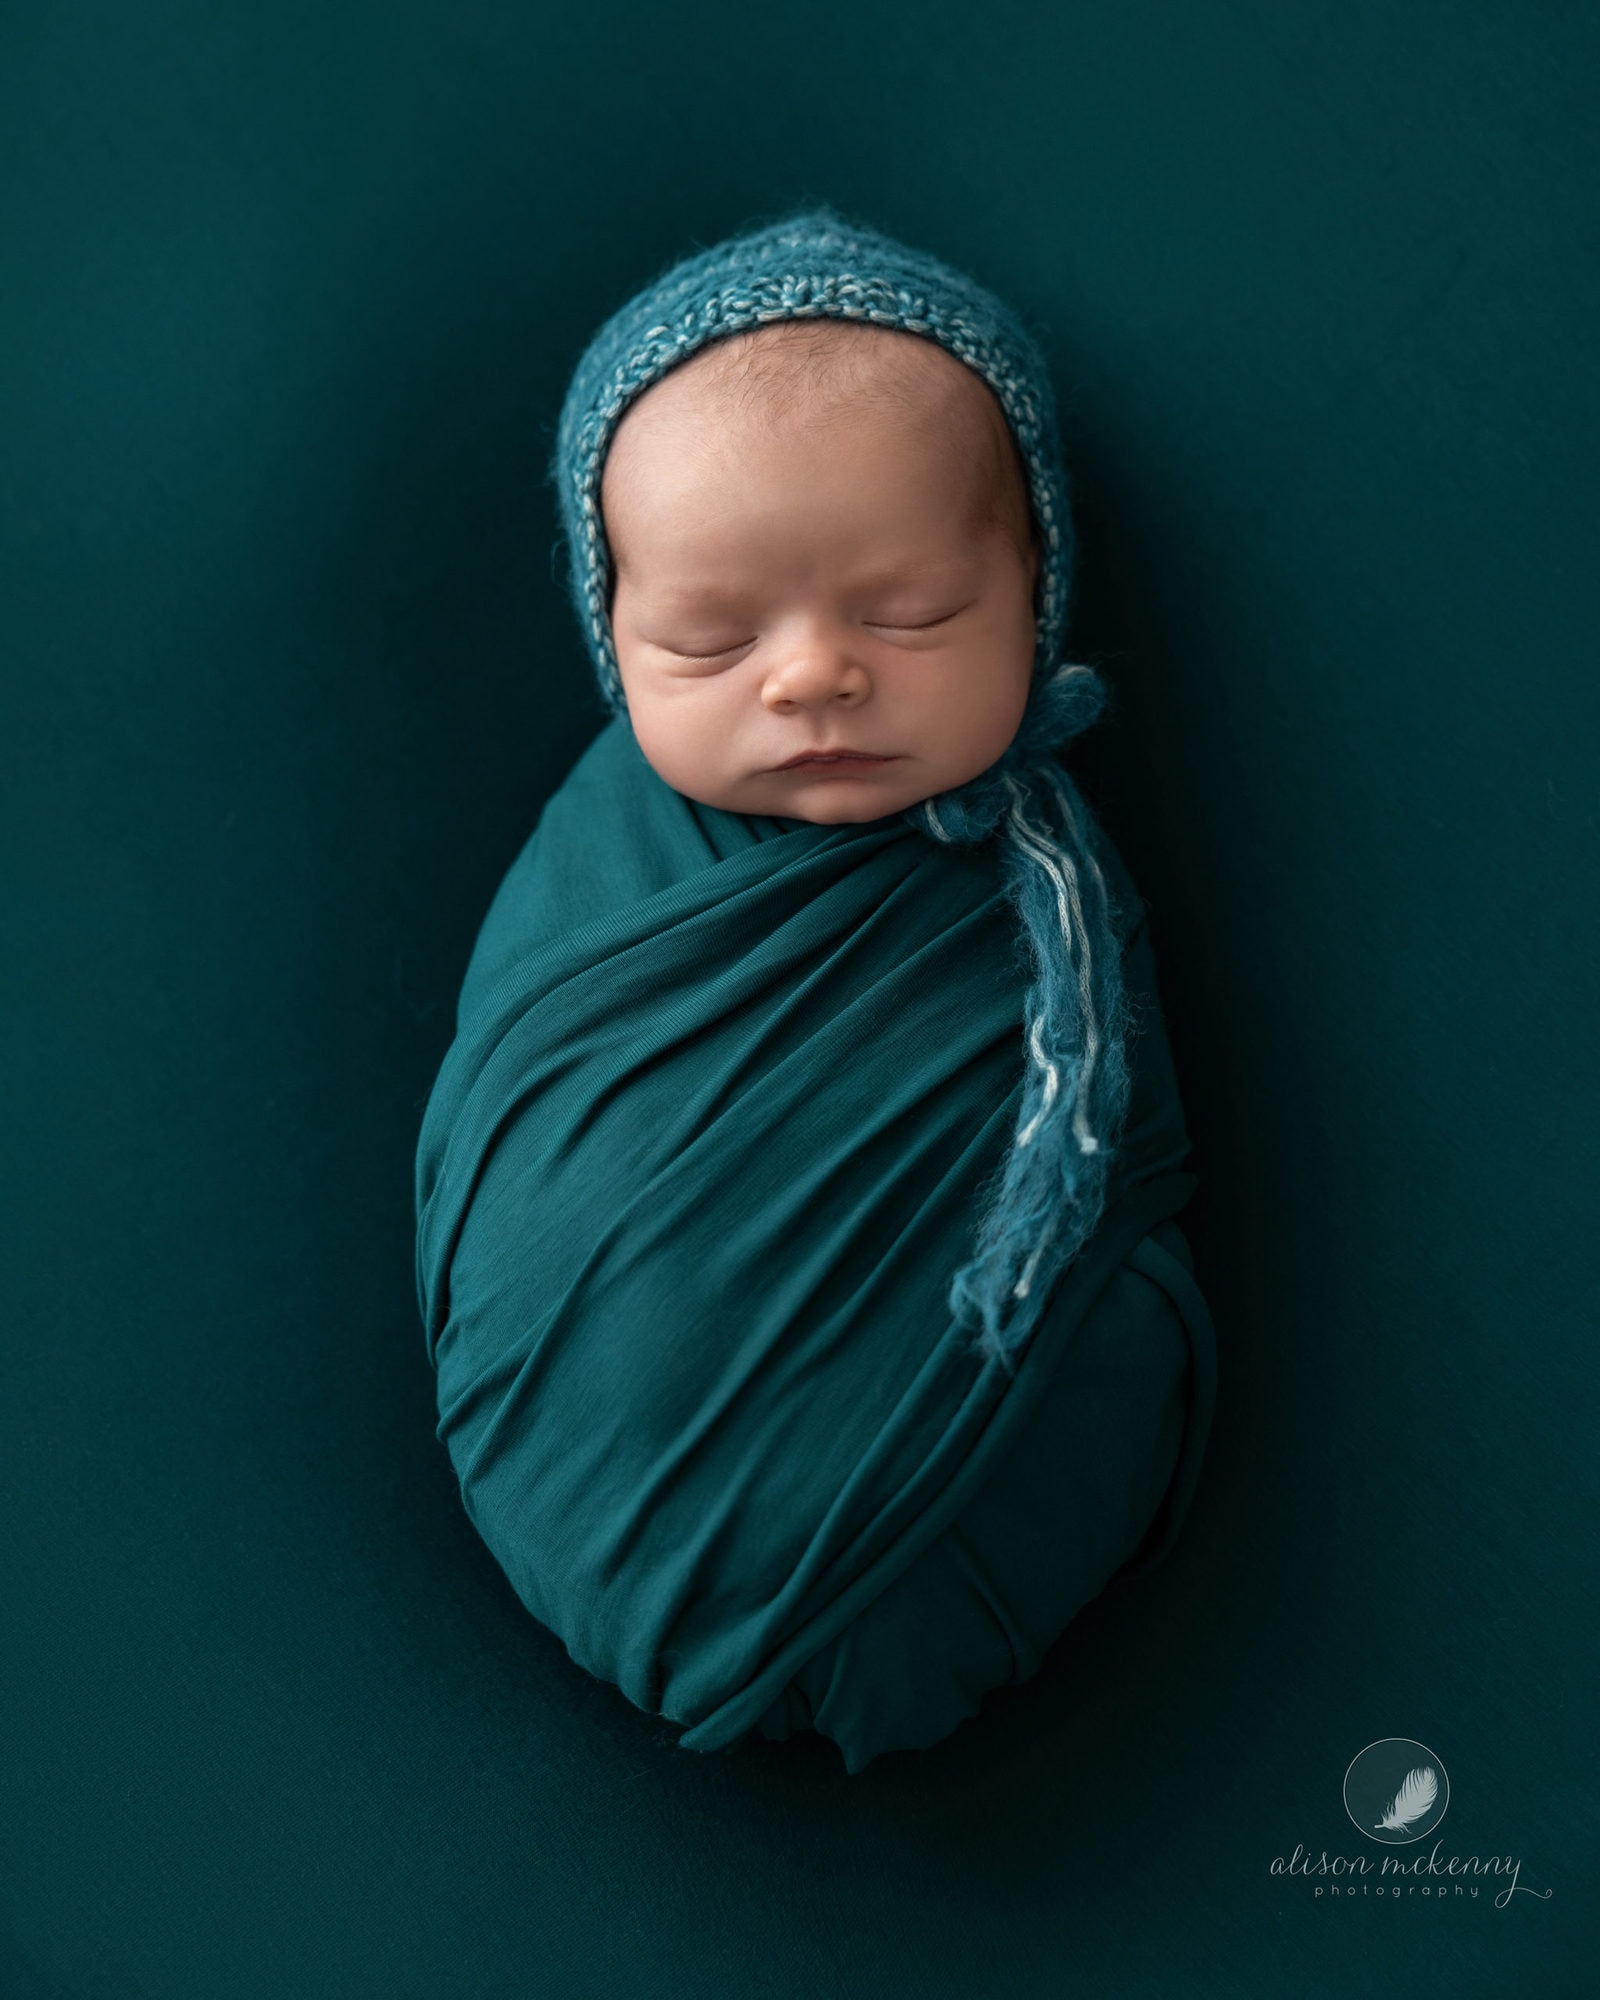 Newborn Baby Boy wrapped in a teal wrap, lies on a teal blanket and has a teal bonnet on his head. He sleeps peacefully during his newborn shoot with suffolk photographer Alison McKenny